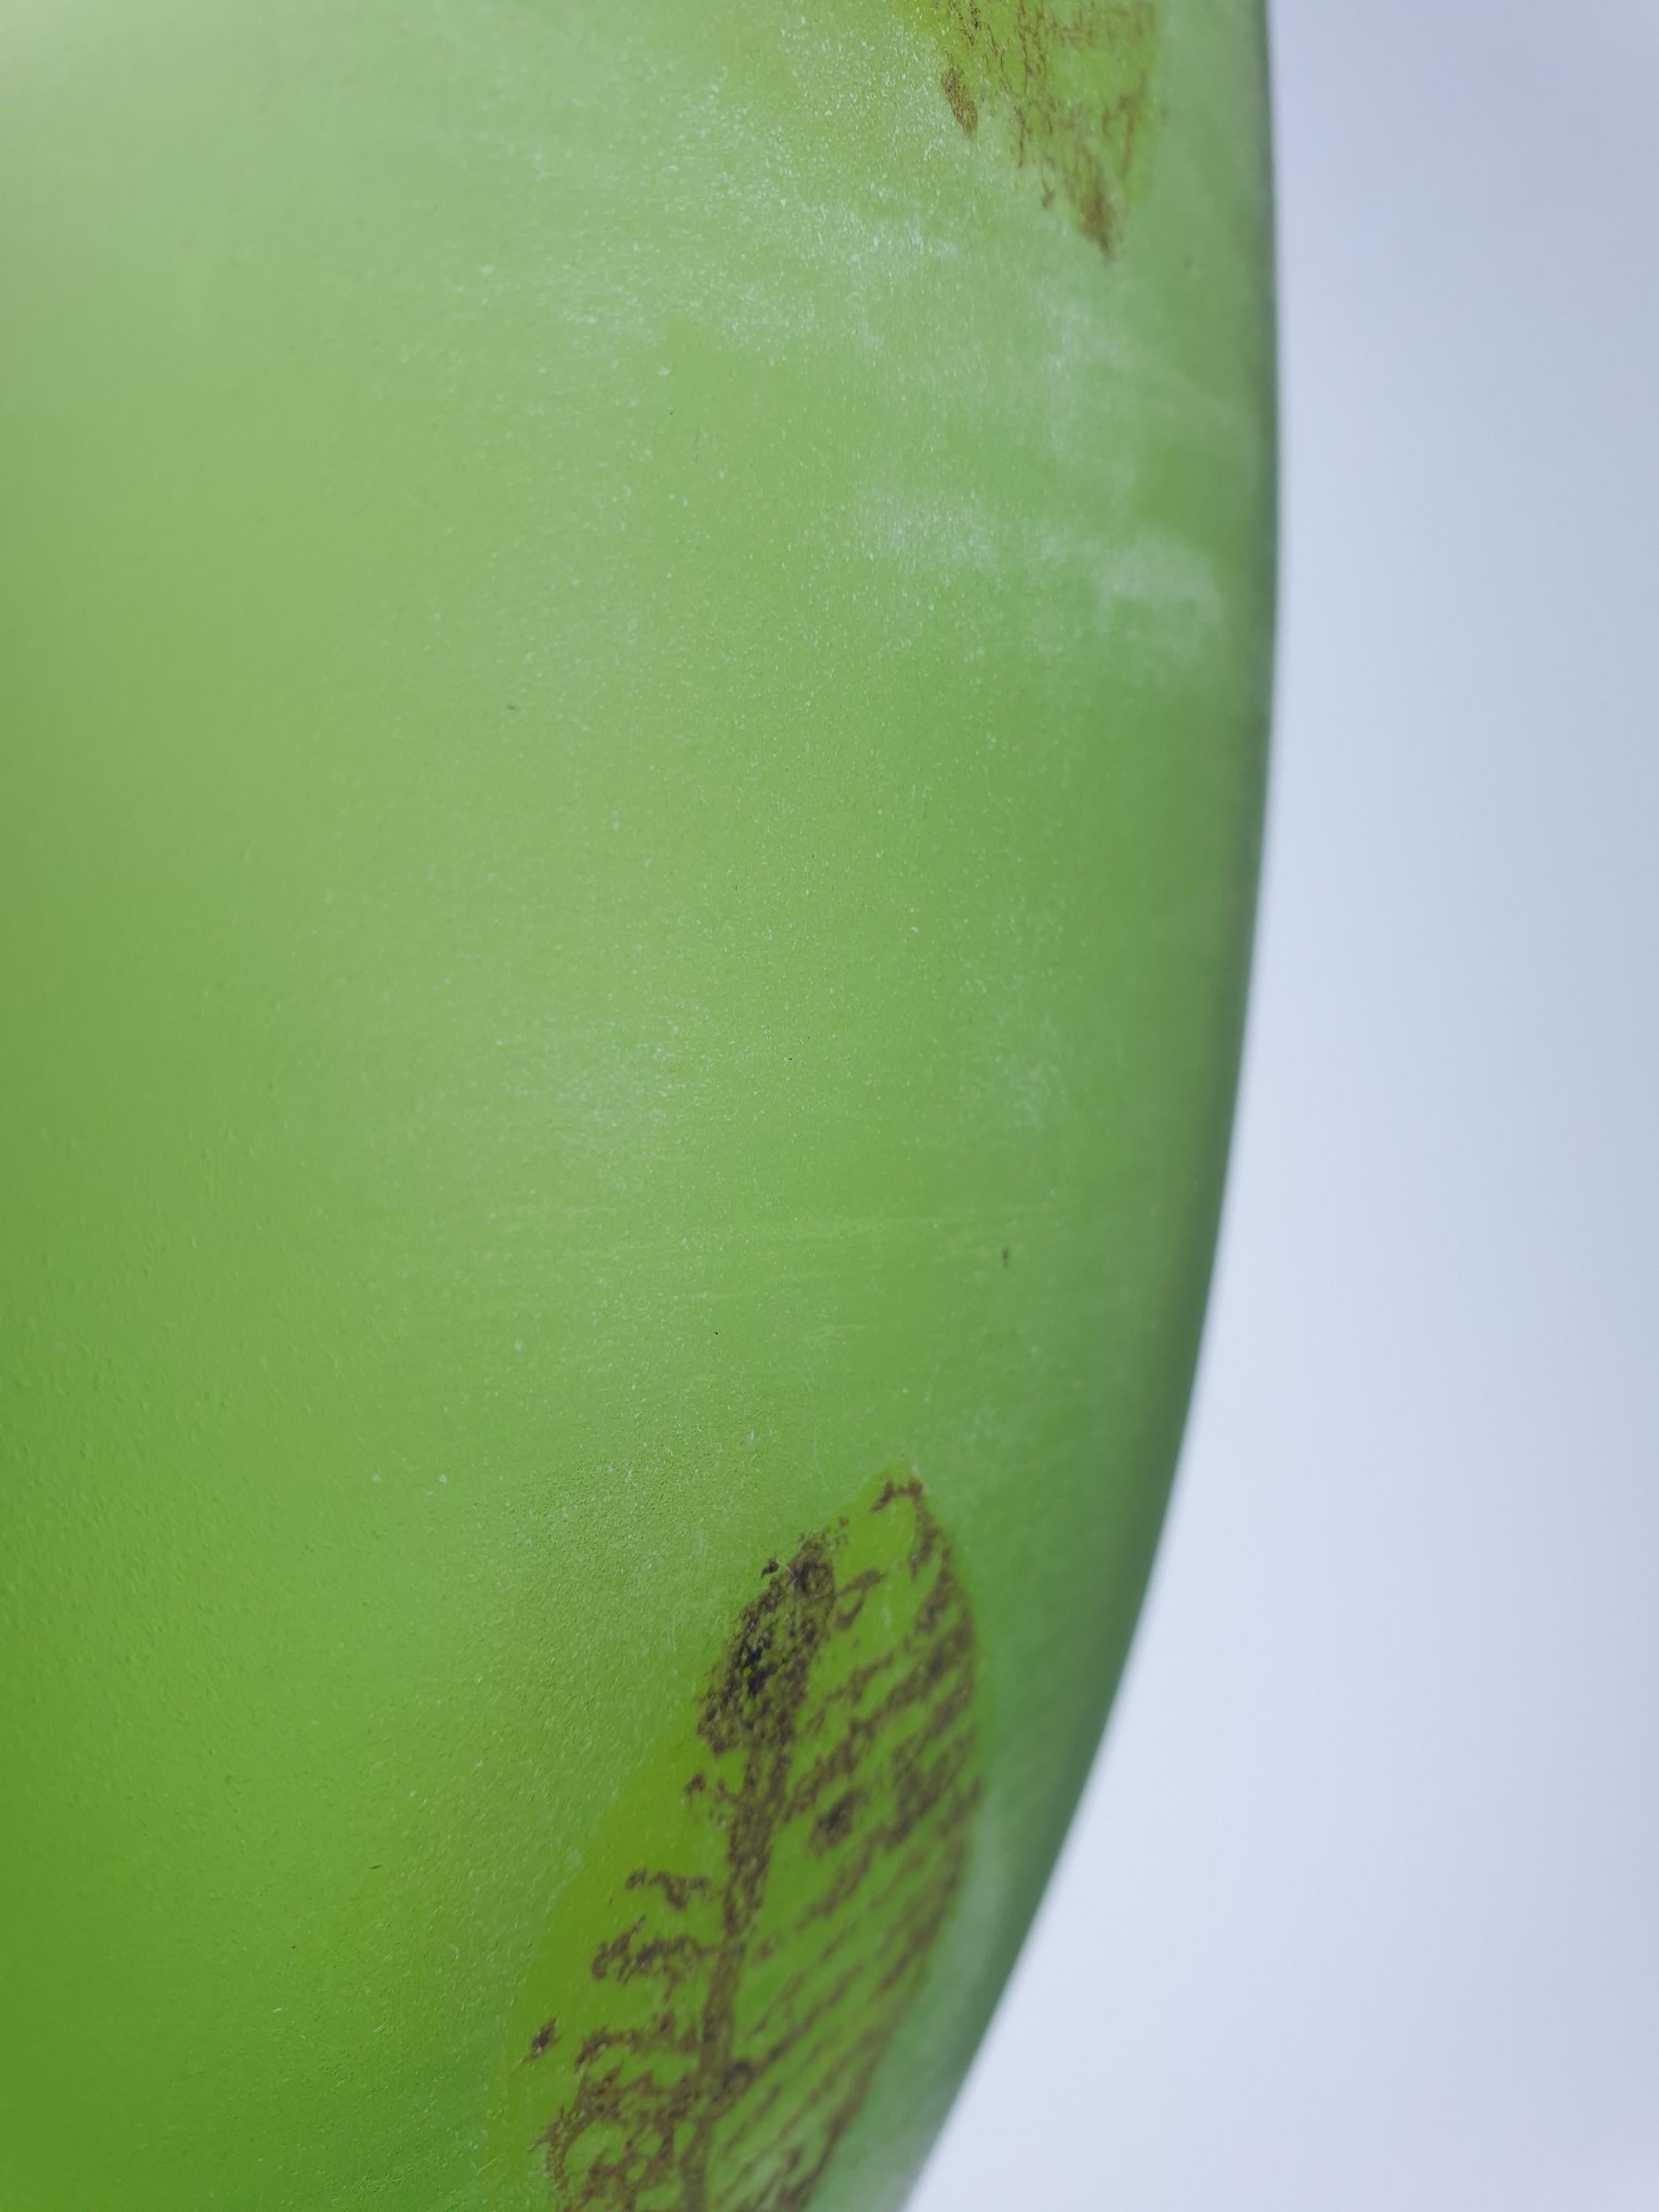 Modern Large Murano Glass Vase with Leaves in Sabbiato Finish, by Cenedese, 1988 For Sale 5